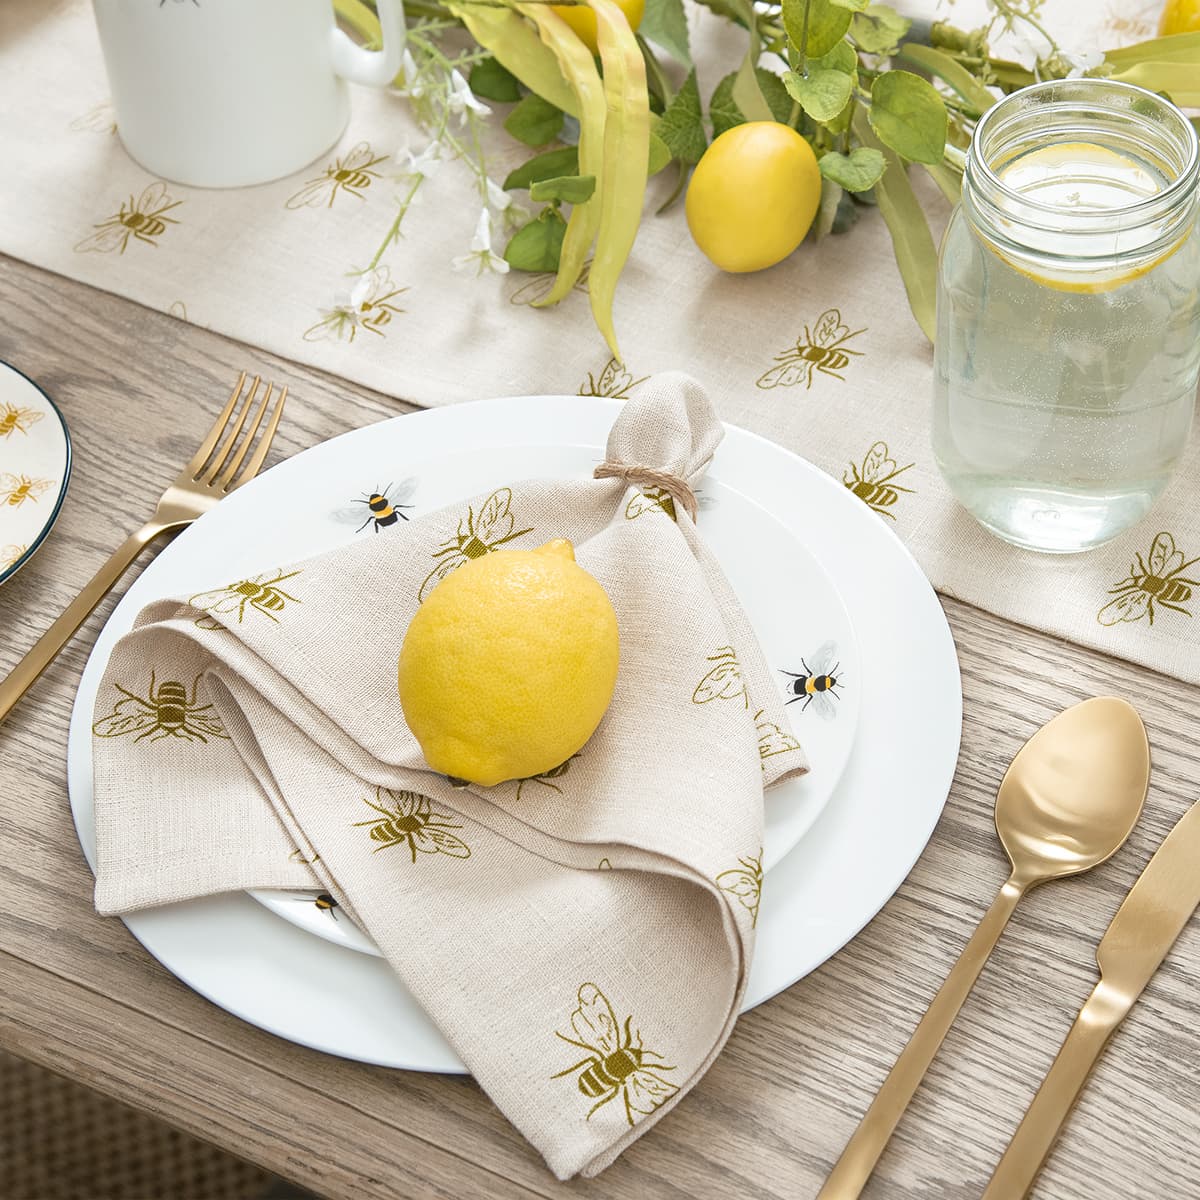 https://cdn.shopify.com/s/files/1/0201/1771/7092/products/bees-linen-lifestyle-table-set-up-fabric-plates-high-res-square-jpg.jpg?v=1664353093